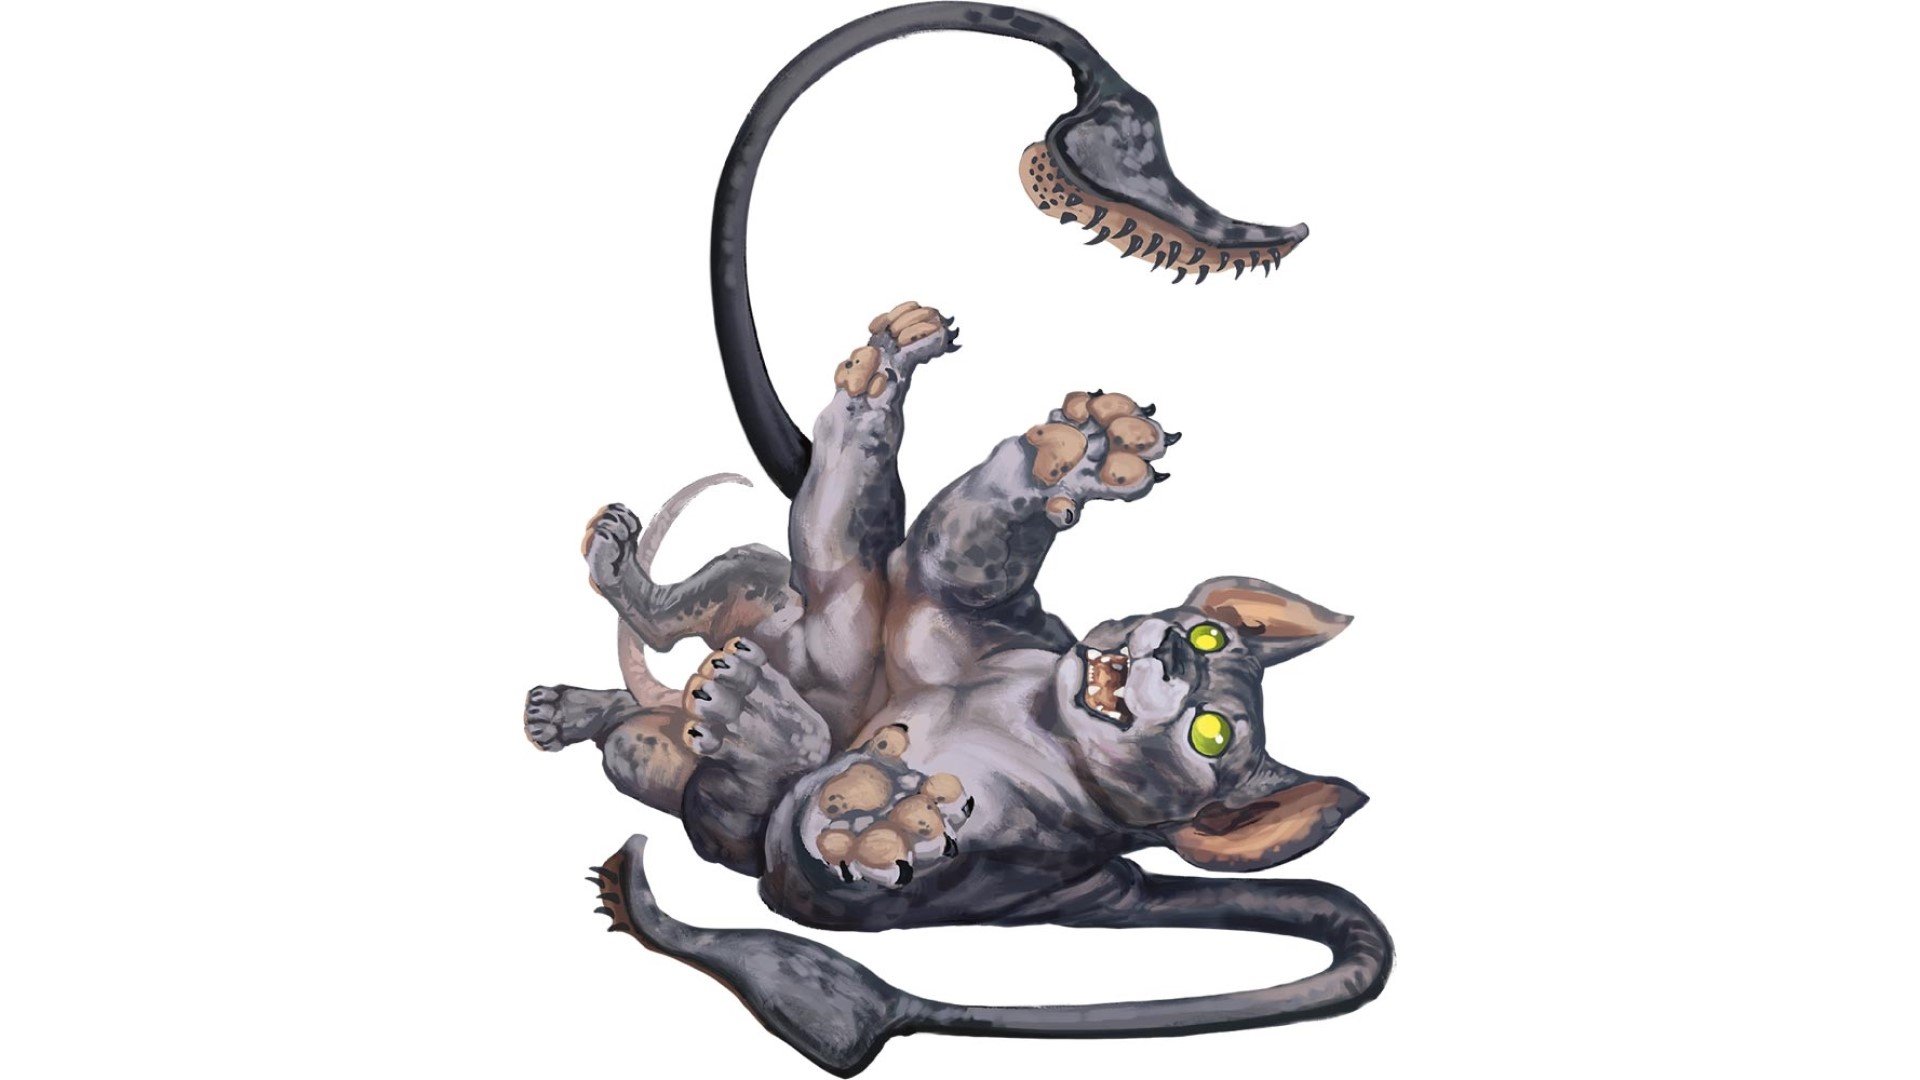 DnD Displacer Beast 5e kitten (art by Wizards of the Coast)